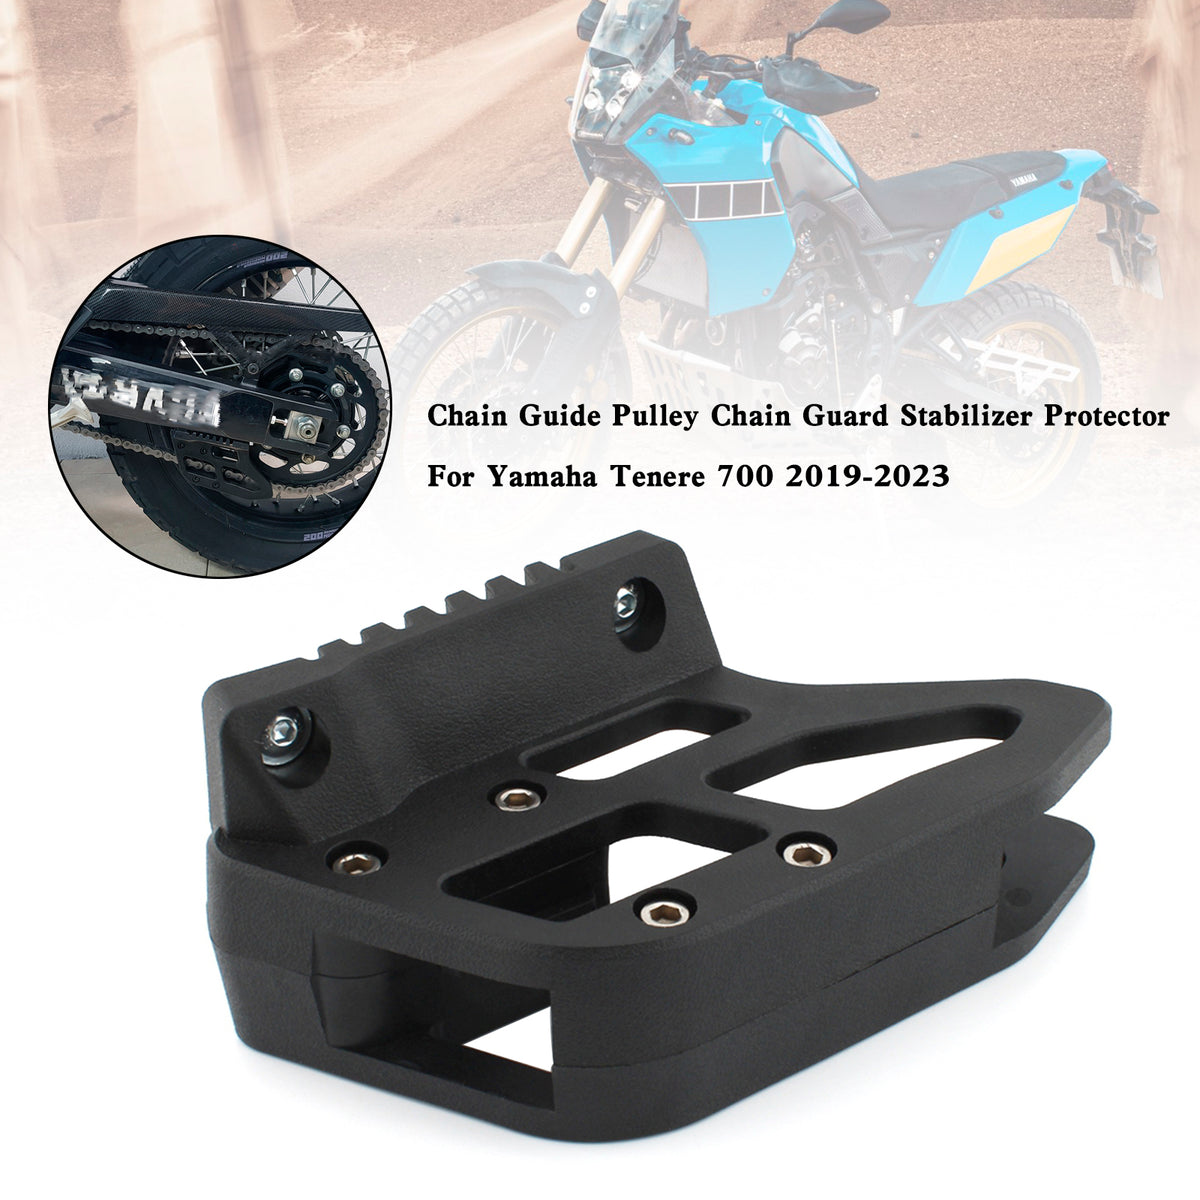 Chain Guide Pulley Chain Guard Stabilizer For Yamaha Tenere 700 XTZ 2019+